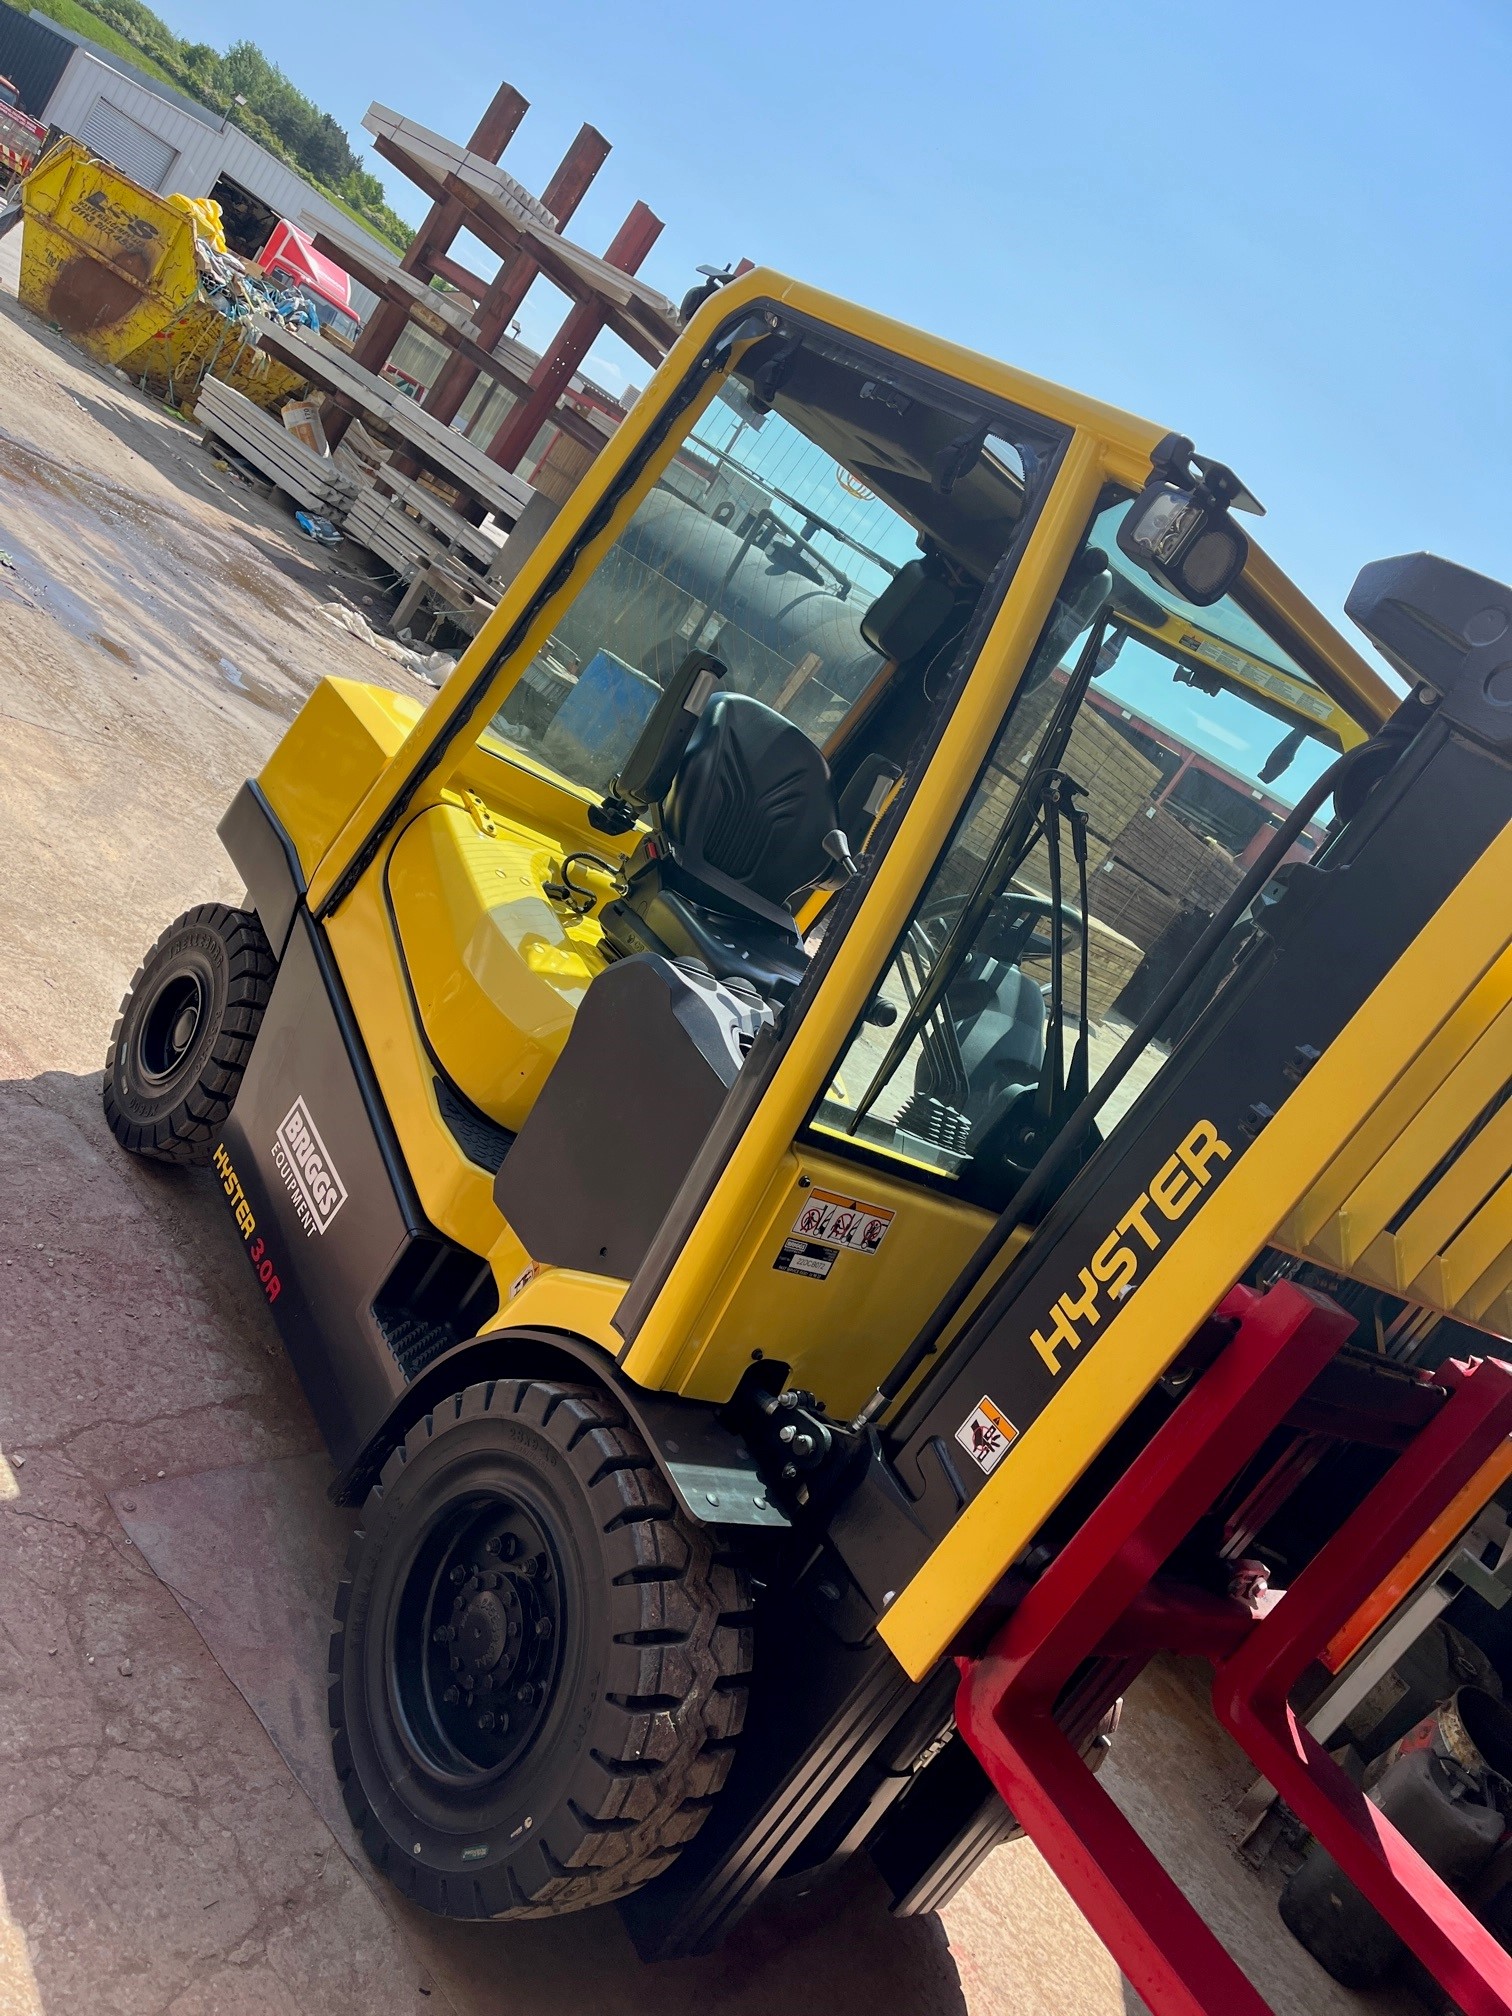 New Hyster A Series Forklift delivered by Briggs Equipment to Atkinsons Fencing